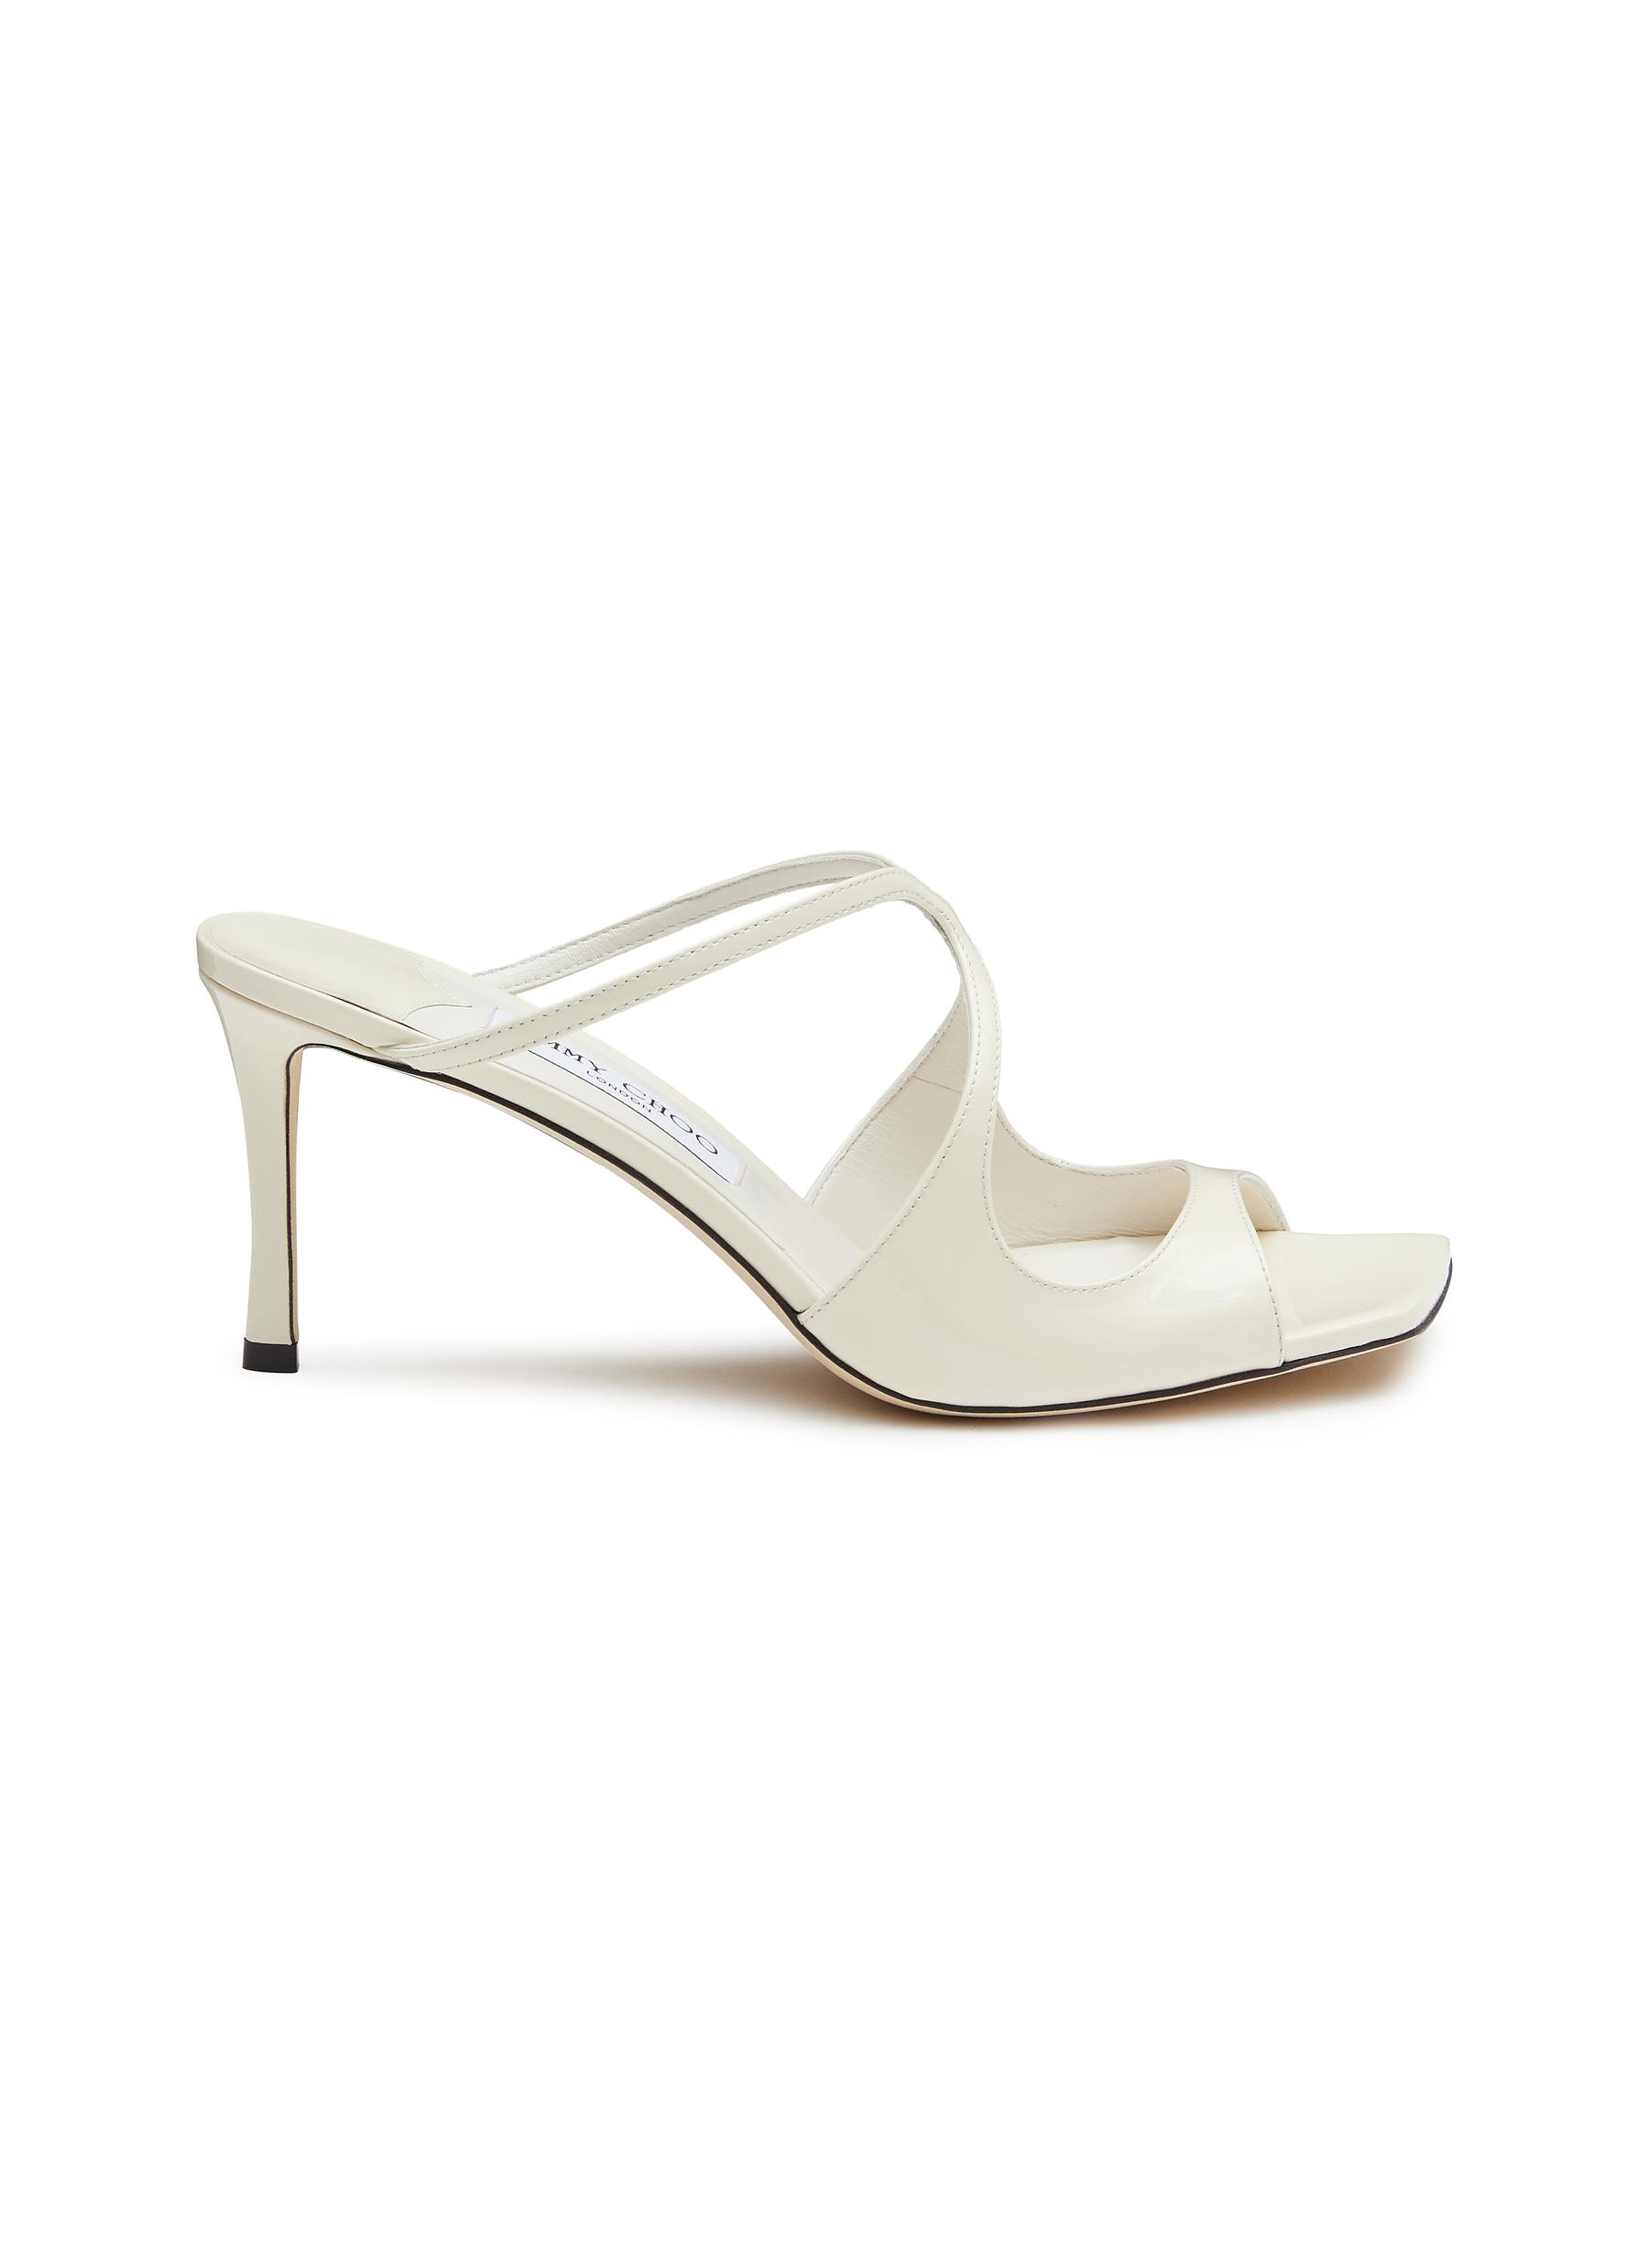 JIMMY CHOO '75 ANISE' PATENT LEATHER SANDALS